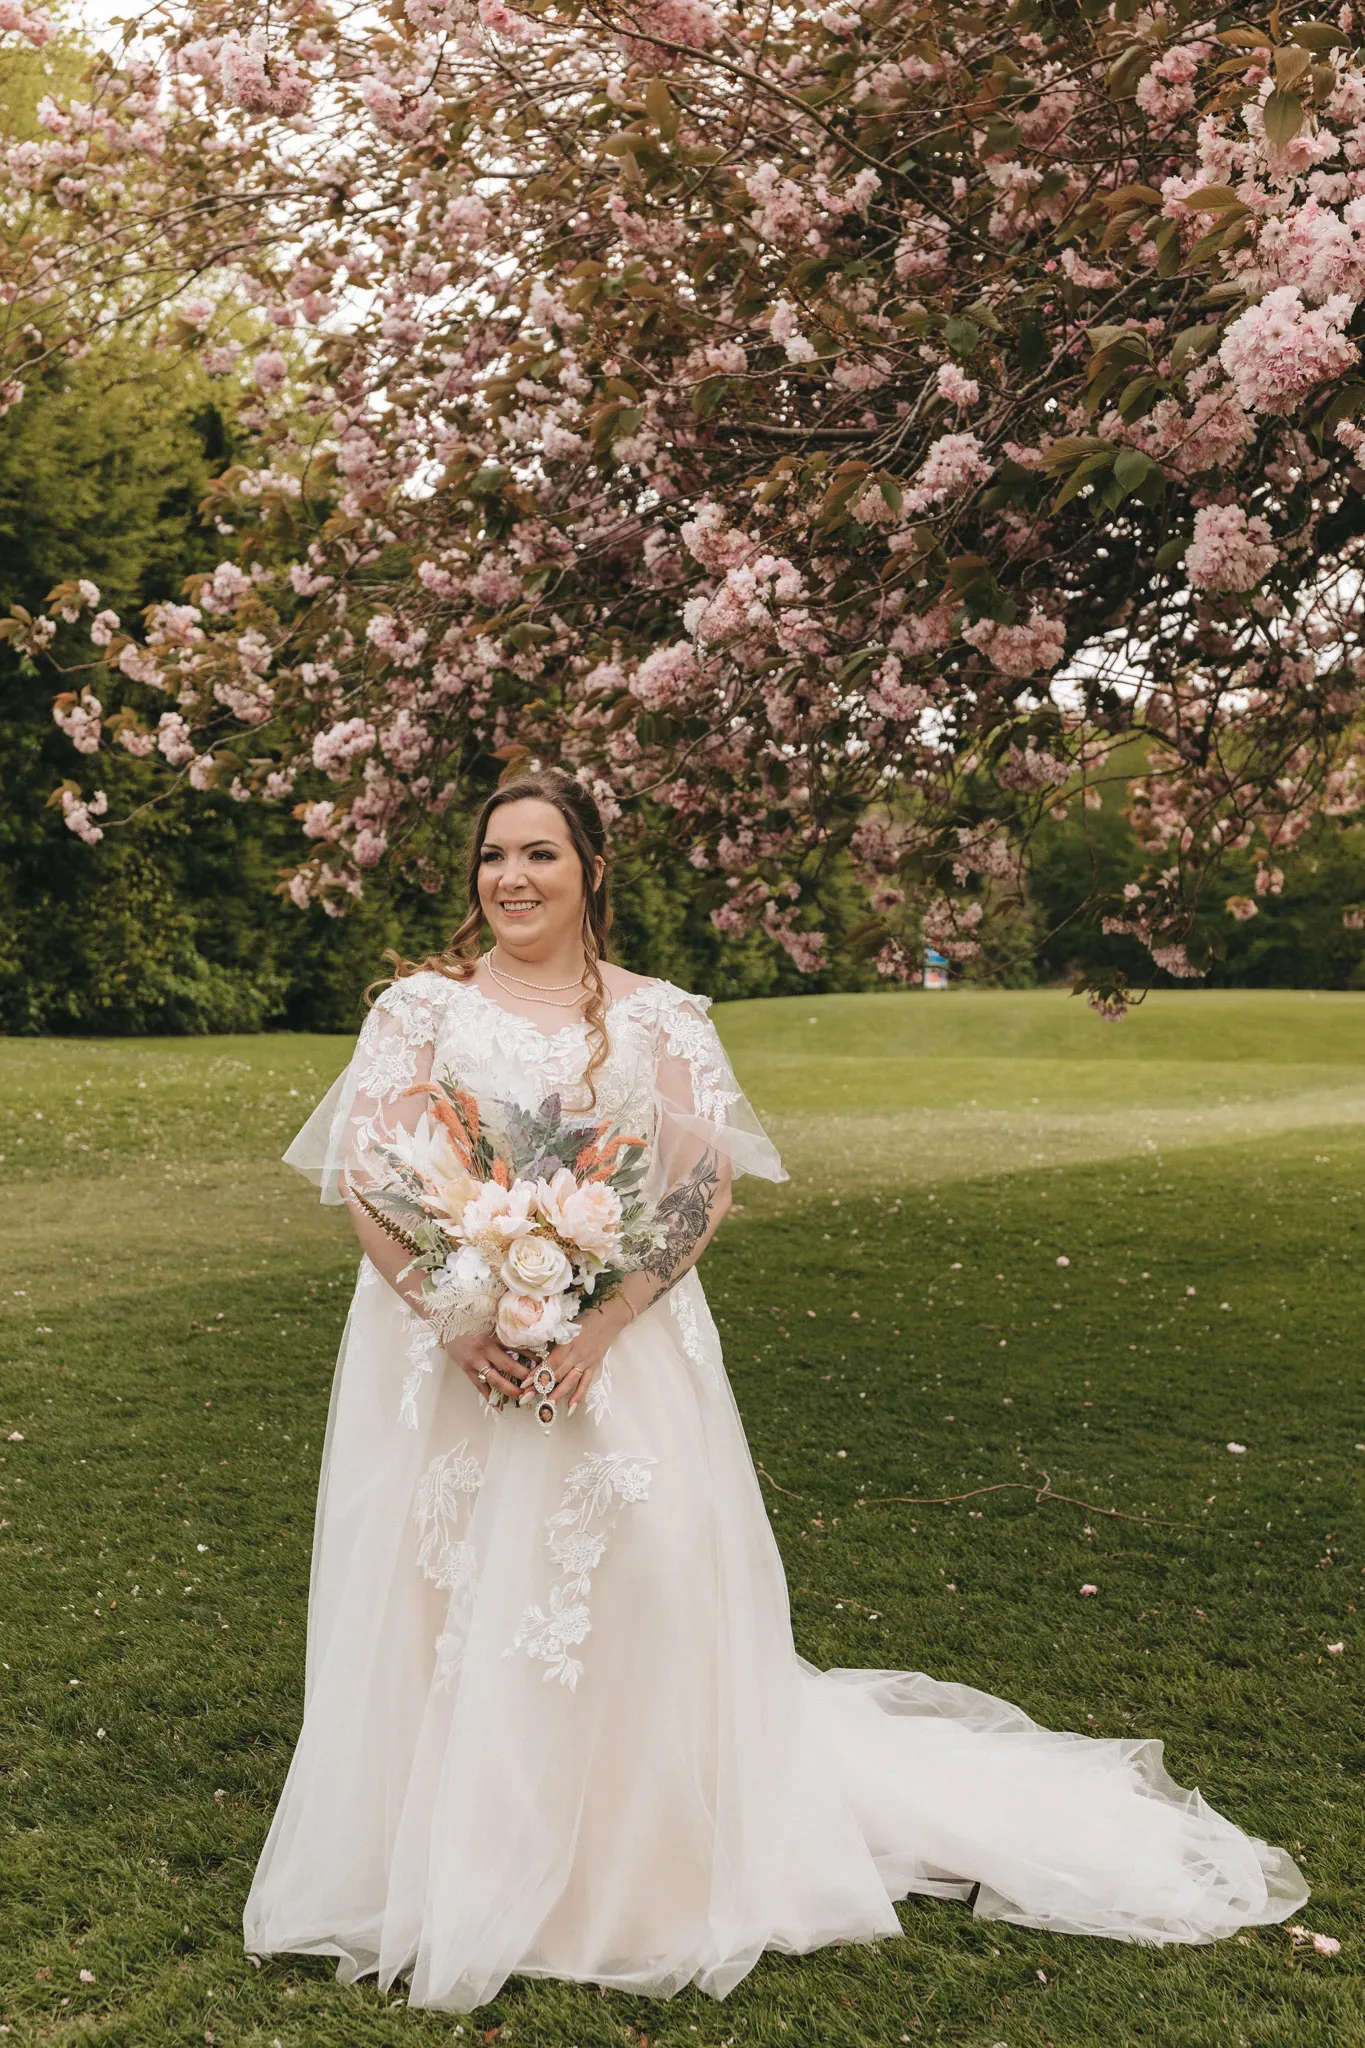 A bride in a lace wedding dress smiles under a blossoming pink tree, holding a large bouquet with pink and orange flowers. she stands on a grassy field, conveying joy and elegance amidst a serene natural setting.